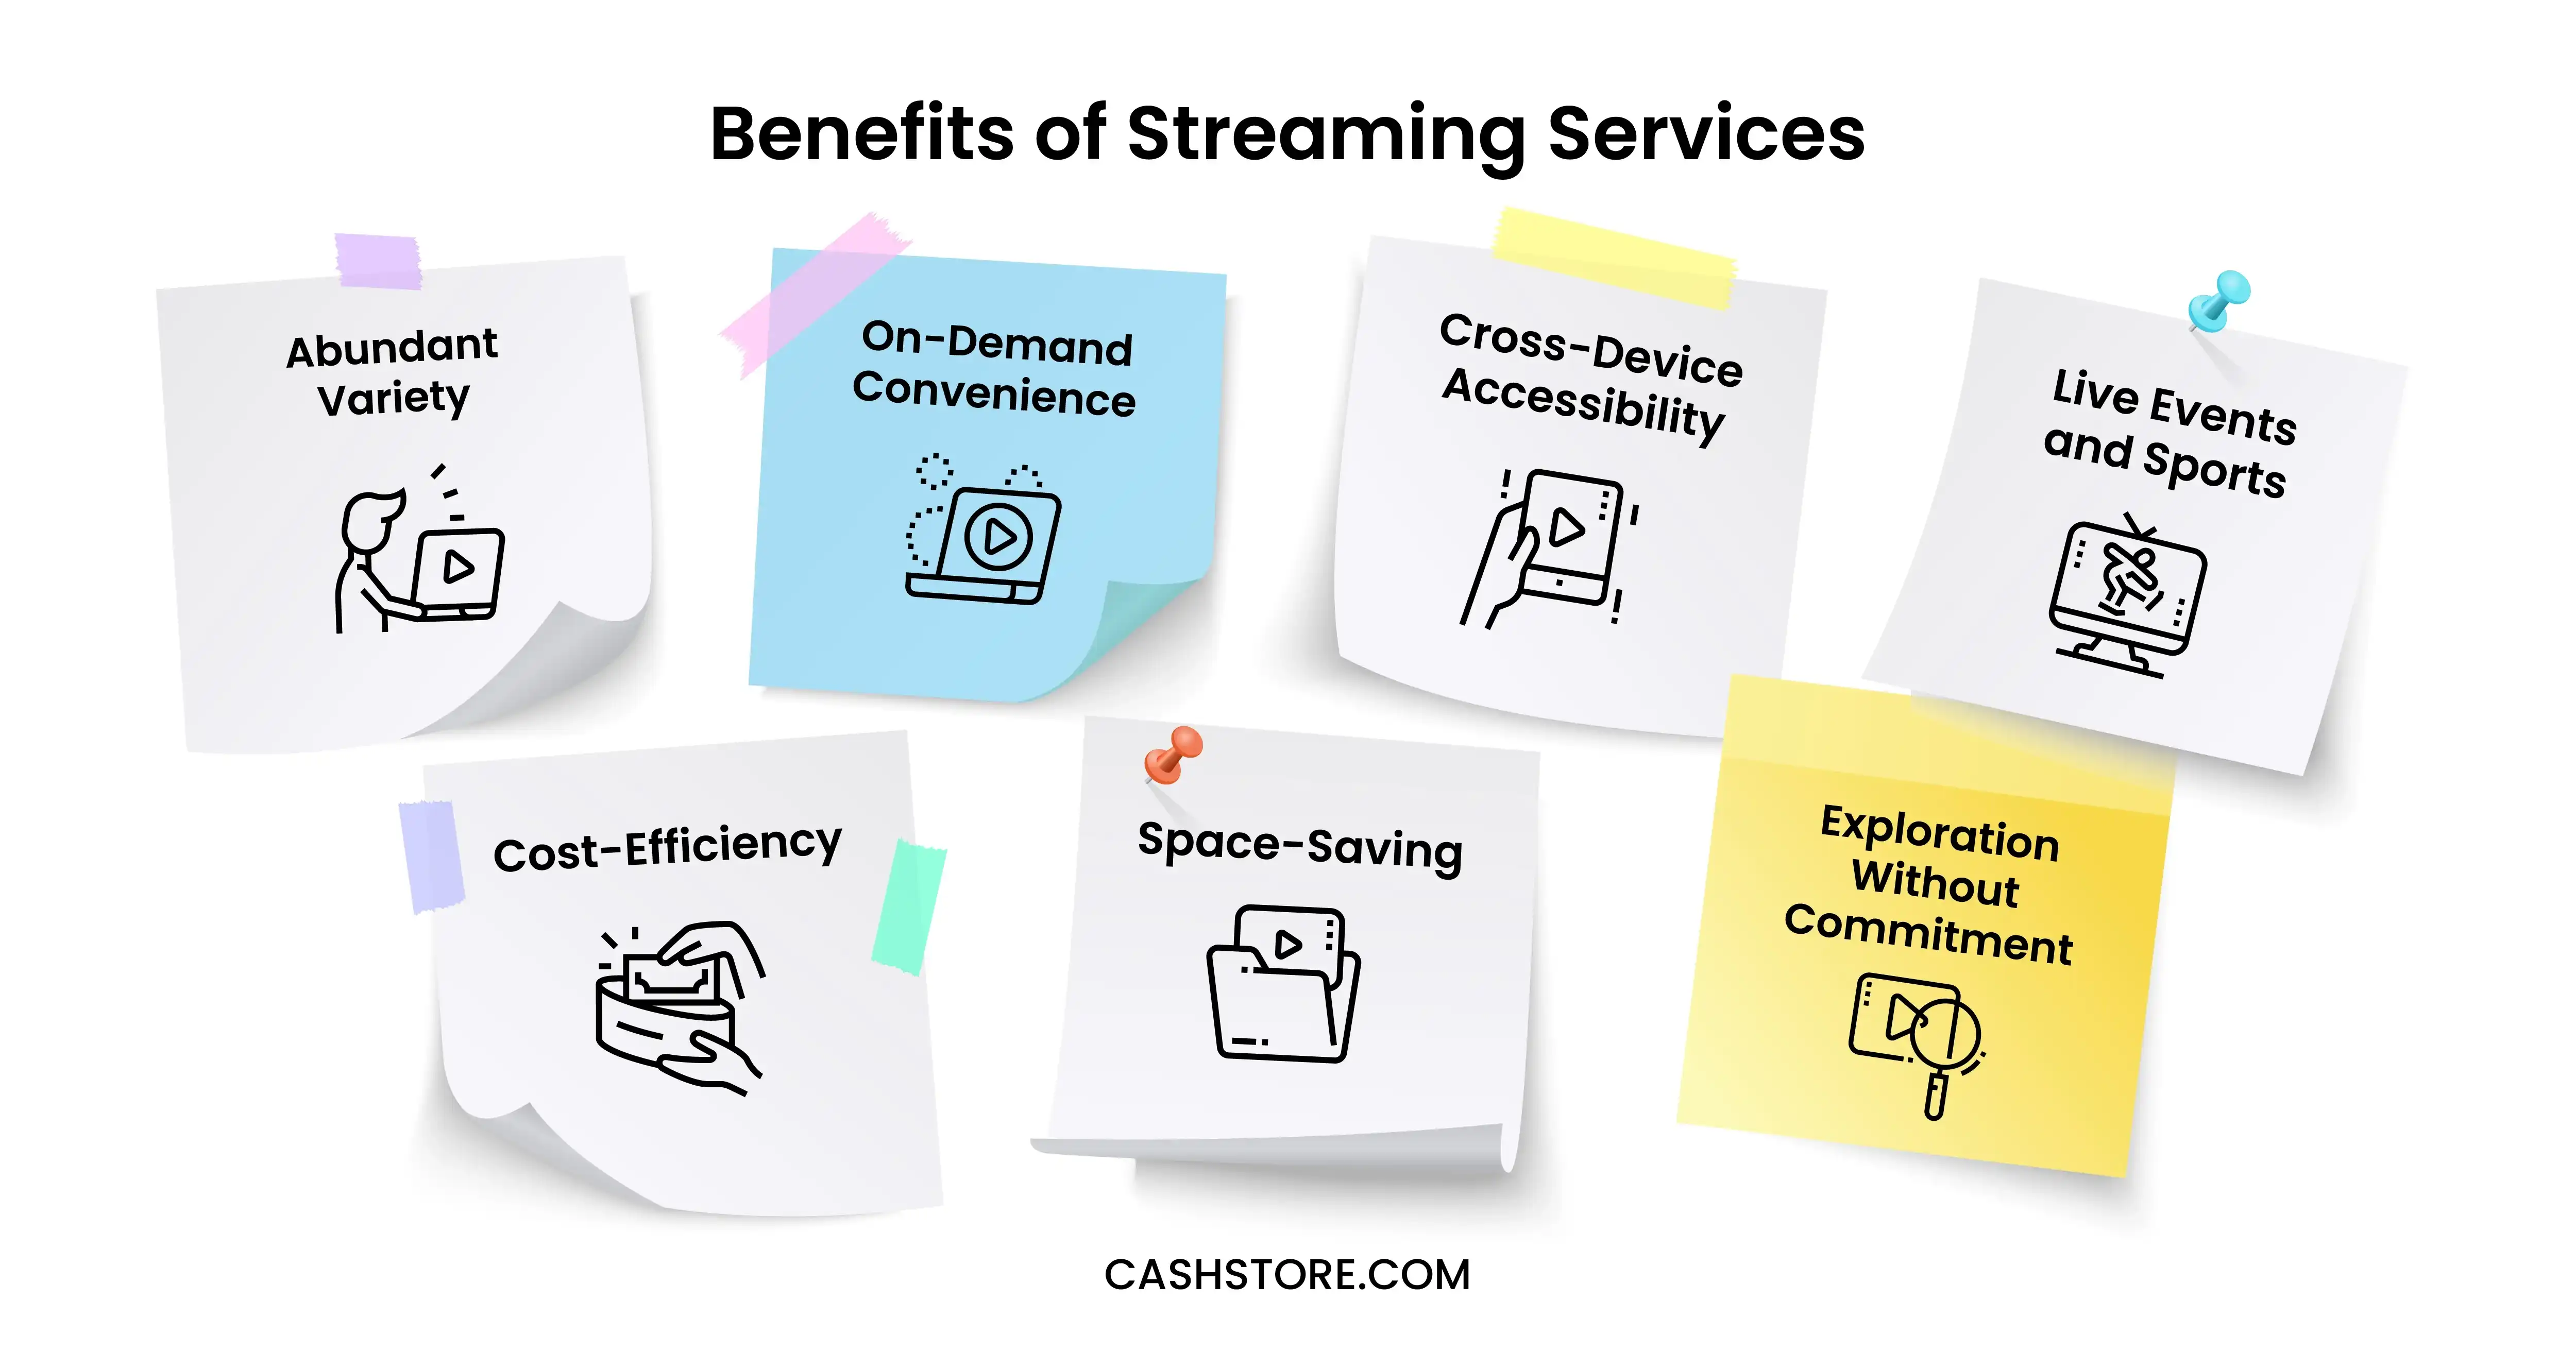 Benefits of Steaming Services